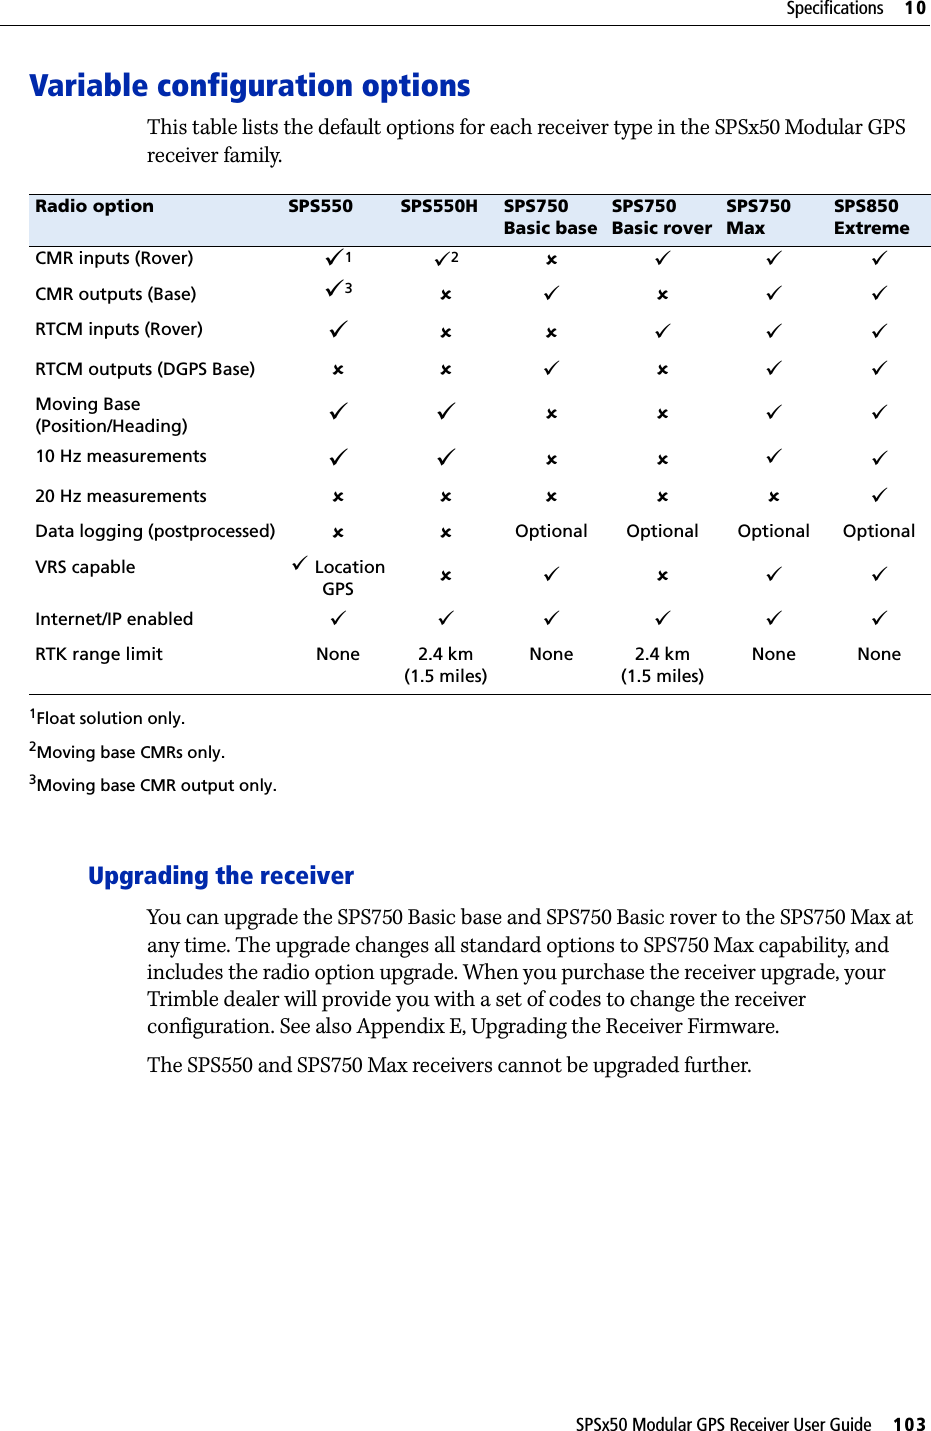 SPSx50 Modular GPS Receiver User Guide     103Specifications     10Variable configuration optionsThis table lists the default options for each receiver type in the SPSx50 Modular GPS receiver family.Upgrading the receiverYou can upgrade the SPS750 Basic base and SPS750 Basic rover to the SPS750 Max at any time. The upgrade changes all standard options to SPS750 Max capability, and includes the radio option upgrade. When you purchase the receiver upgrade, your Trimble dealer will provide you with a set of codes to change the receiver configuration. See also Appendix E, Upgrading the Receiver Firmware.The SPS550 and SPS750 Max receivers cannot be upgraded further.Radio option SPS550 SPS550H SPS750 Basic baseSPS750 Basic roverSPS750 MaxSPS850 ExtremeCMR inputs (Rover) 911Float solution only.922Moving base CMRs only.8999CMR outputs (Base) 933Moving base CMR output only.89 8 99RTCM inputs (Rover) 988 999RTCM outputs (DGPS Base) 889899Moving Base (Position/Heading) 99889910 Hz measurements 99889920 Hz measurements 888 8 89Data logging (postprocessed) 88Optional Optional Optional OptionalVRS capable 9Location GPS 89 8 99Internet/IP enabled 999 9 99RTK range limit None 2.4 km (1.5 miles)None 2.4 km (1.5 miles)None None